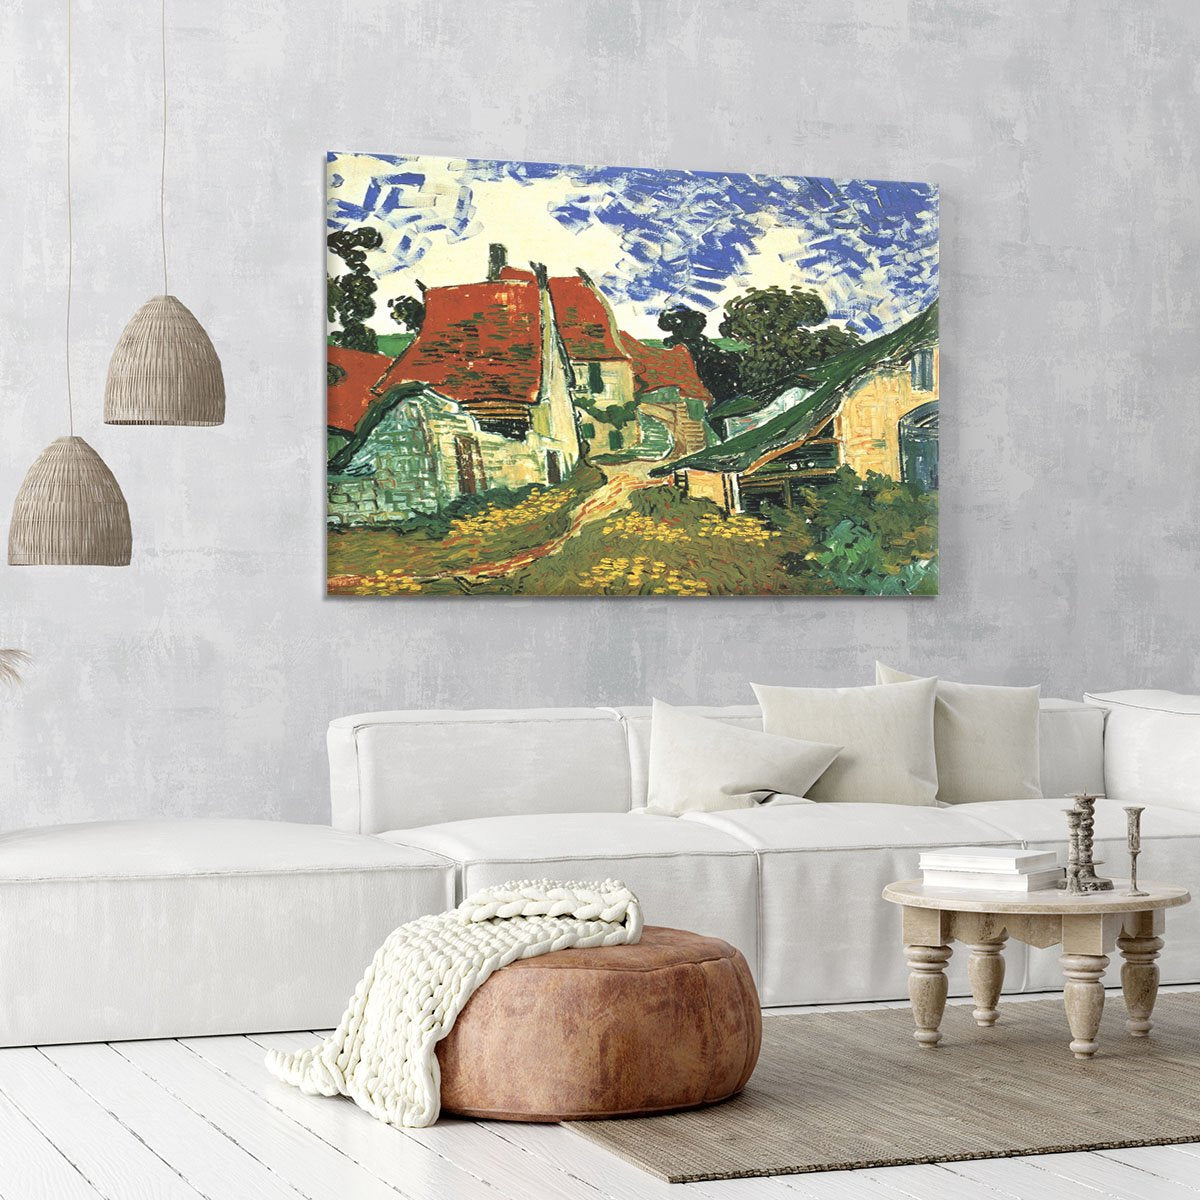 Villages Street in Auvers by Van Gogh Canvas Print or Poster